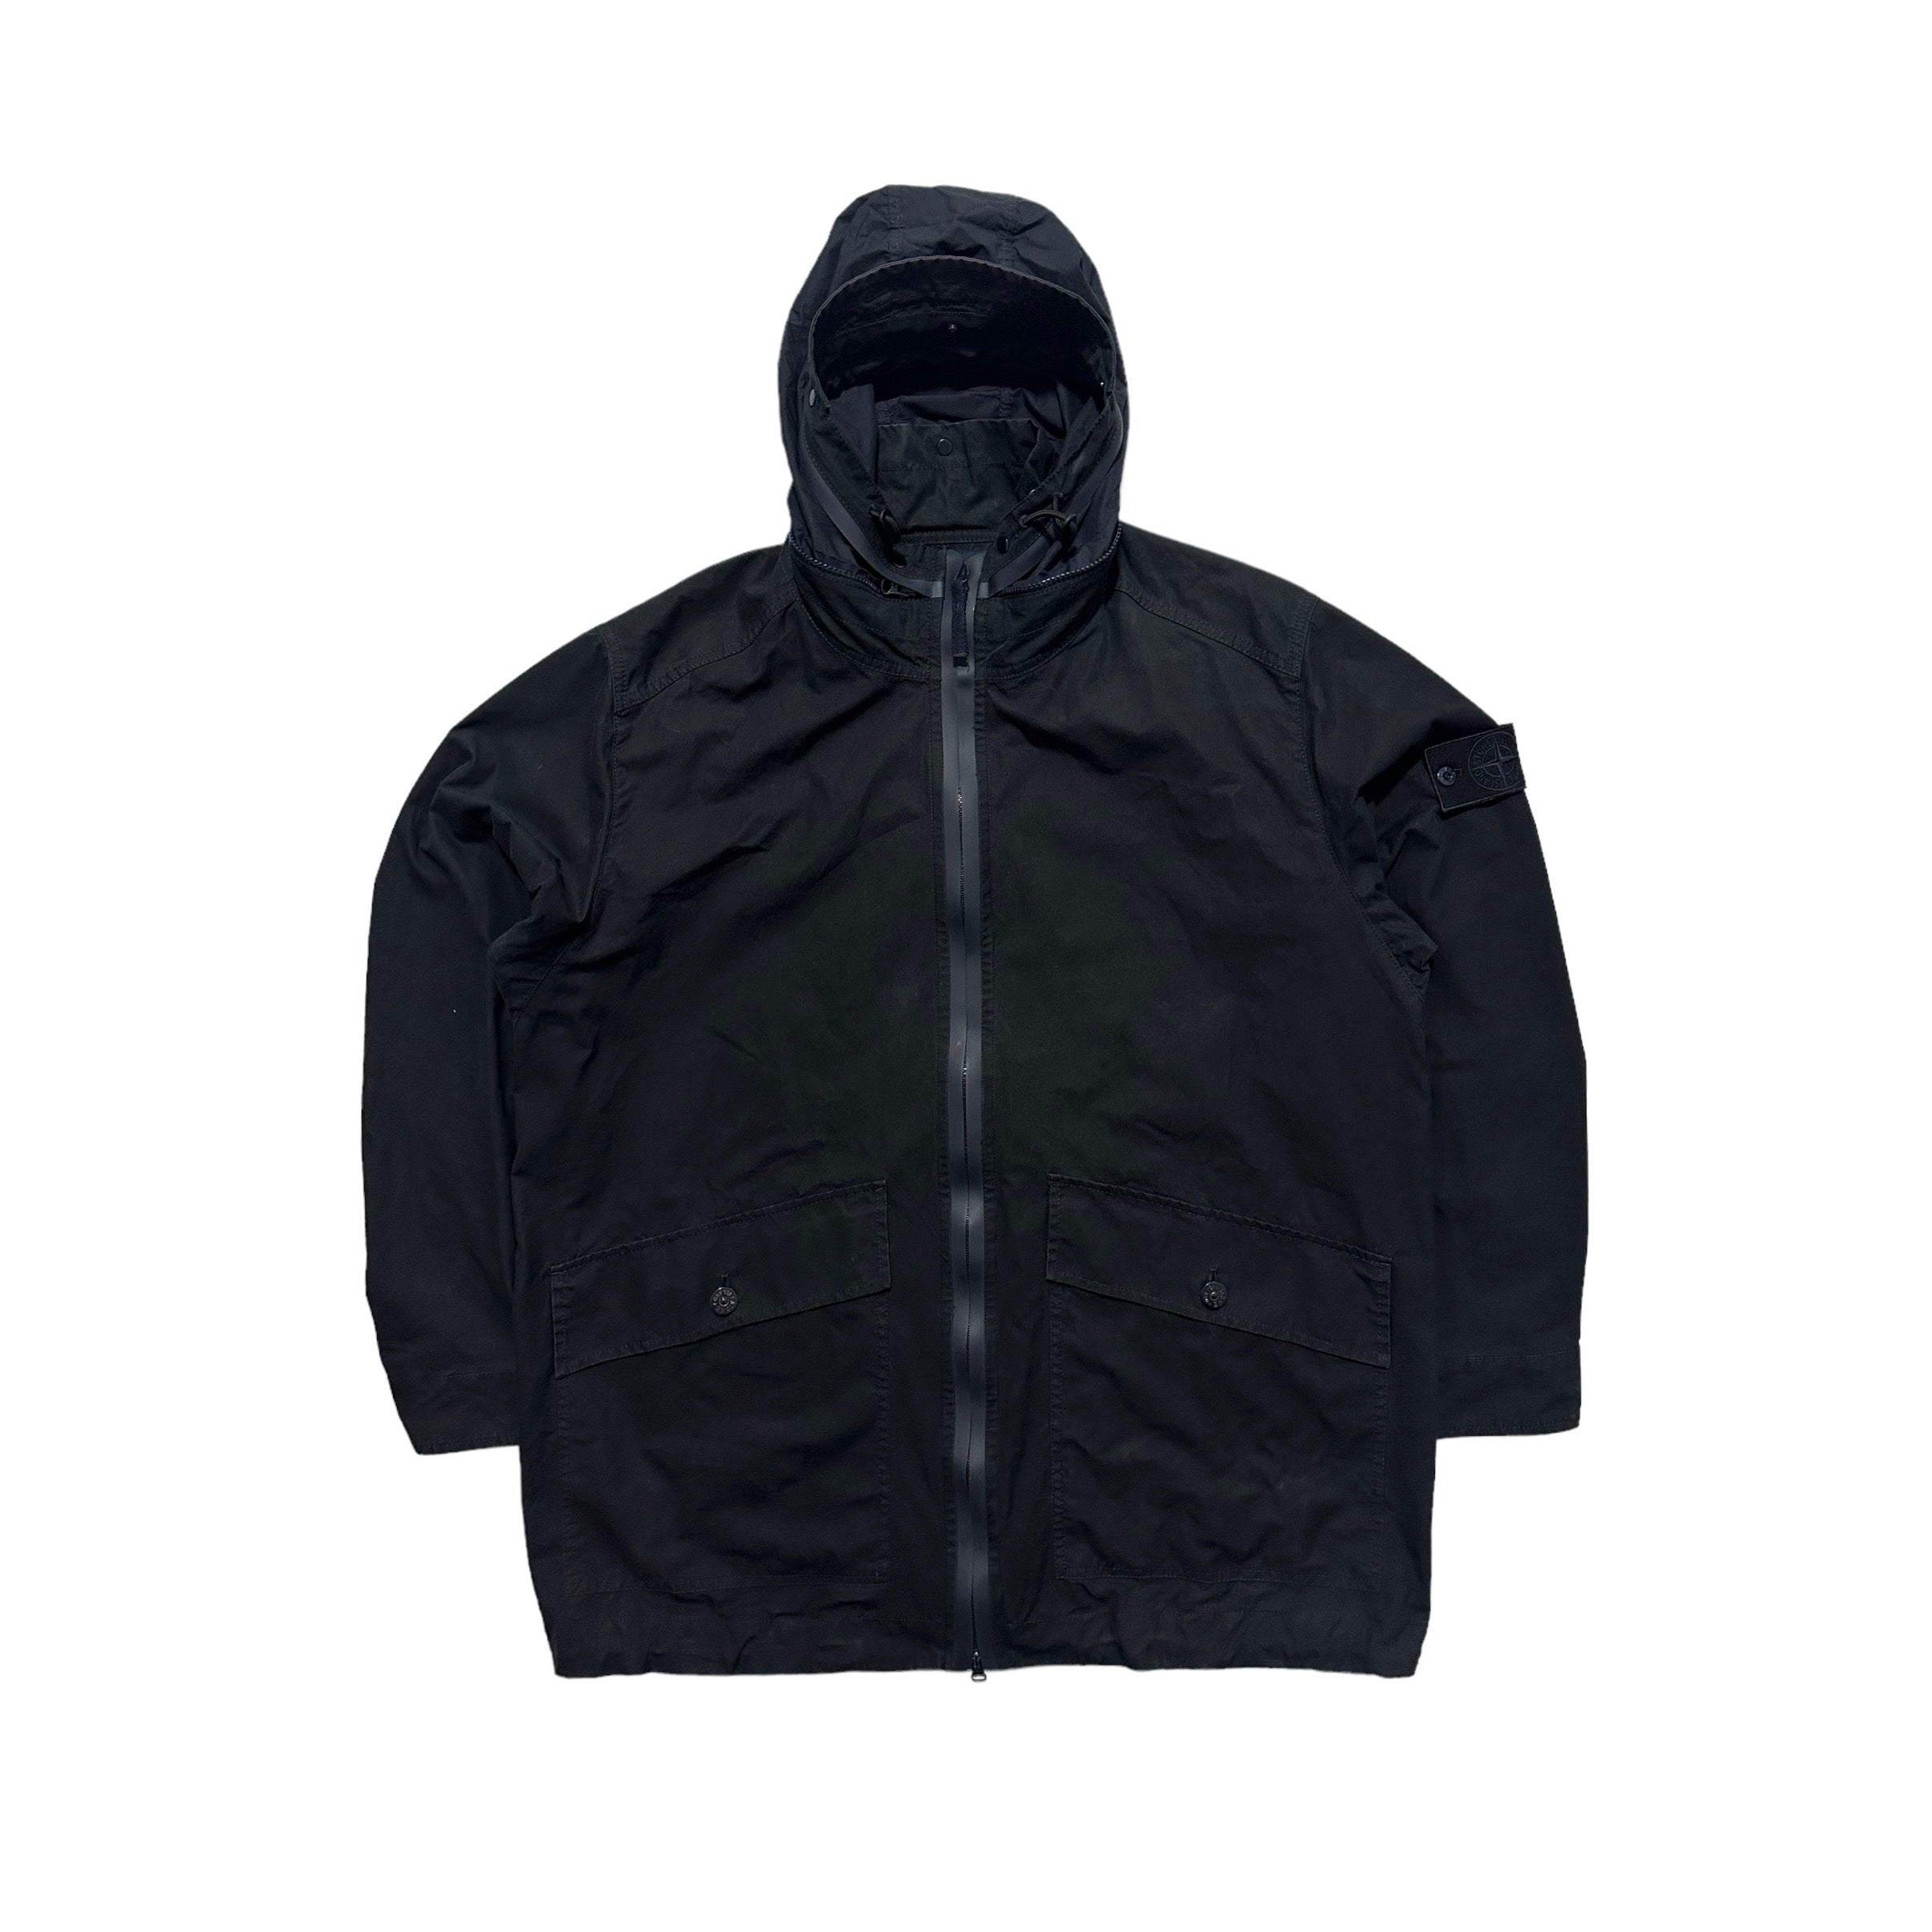 Stone Island Weatherproof Cotton Ghost Piece Parka Jacket with Packable Hood